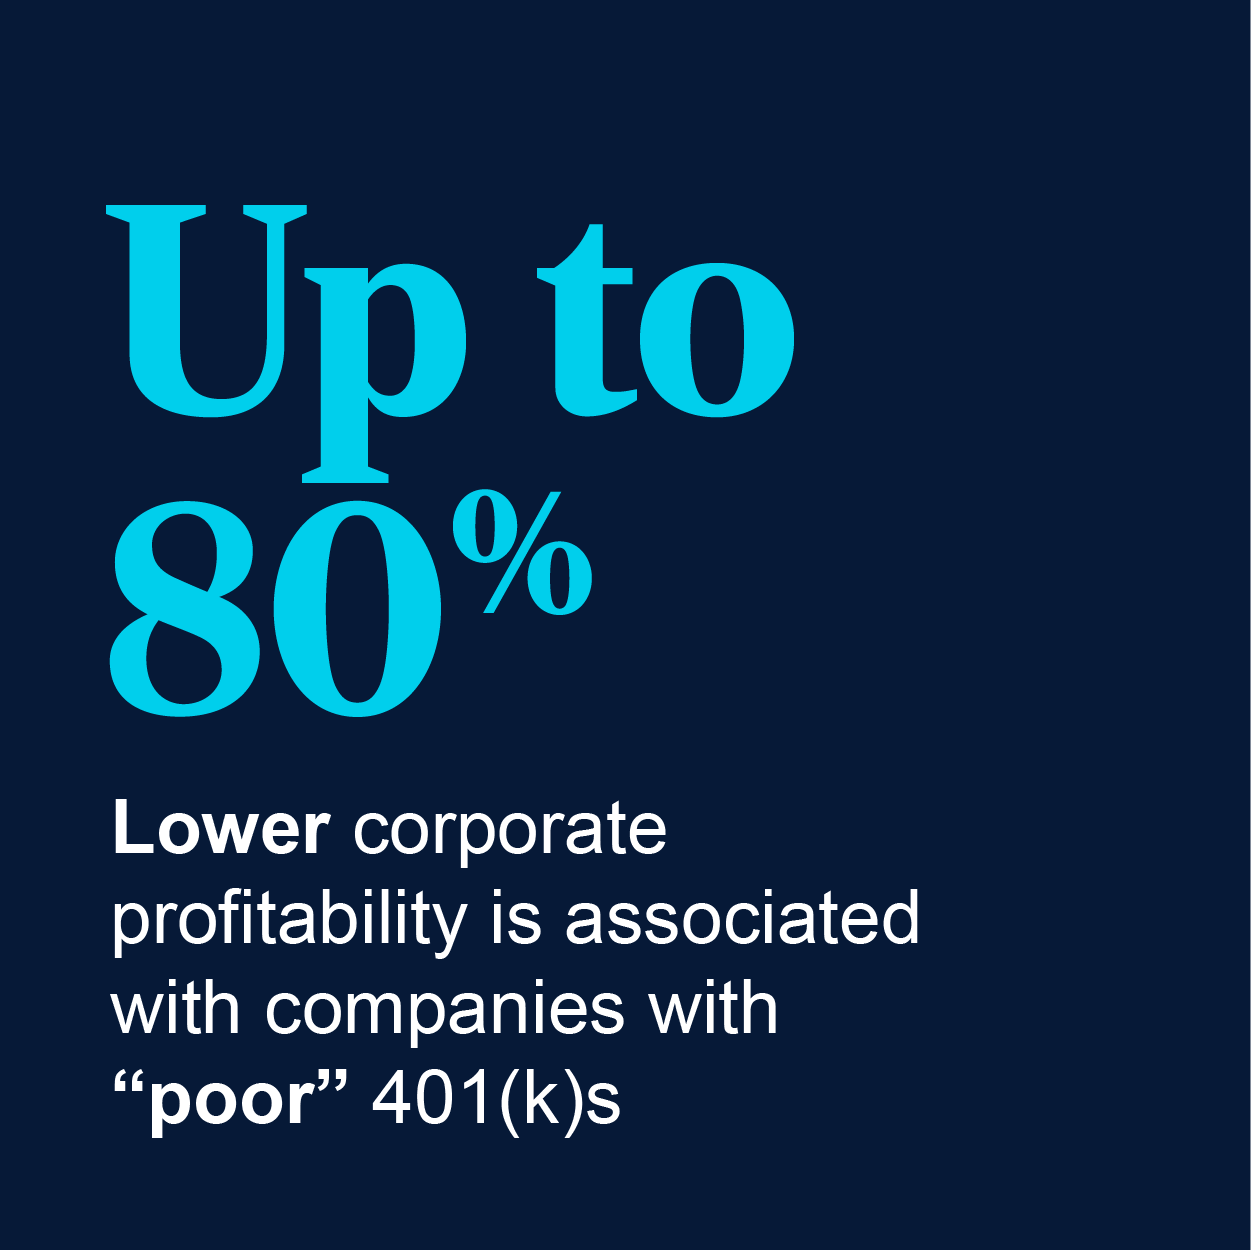 Up to 80% Lower corporate profitability is associated with companies with "poor" 401(k)s